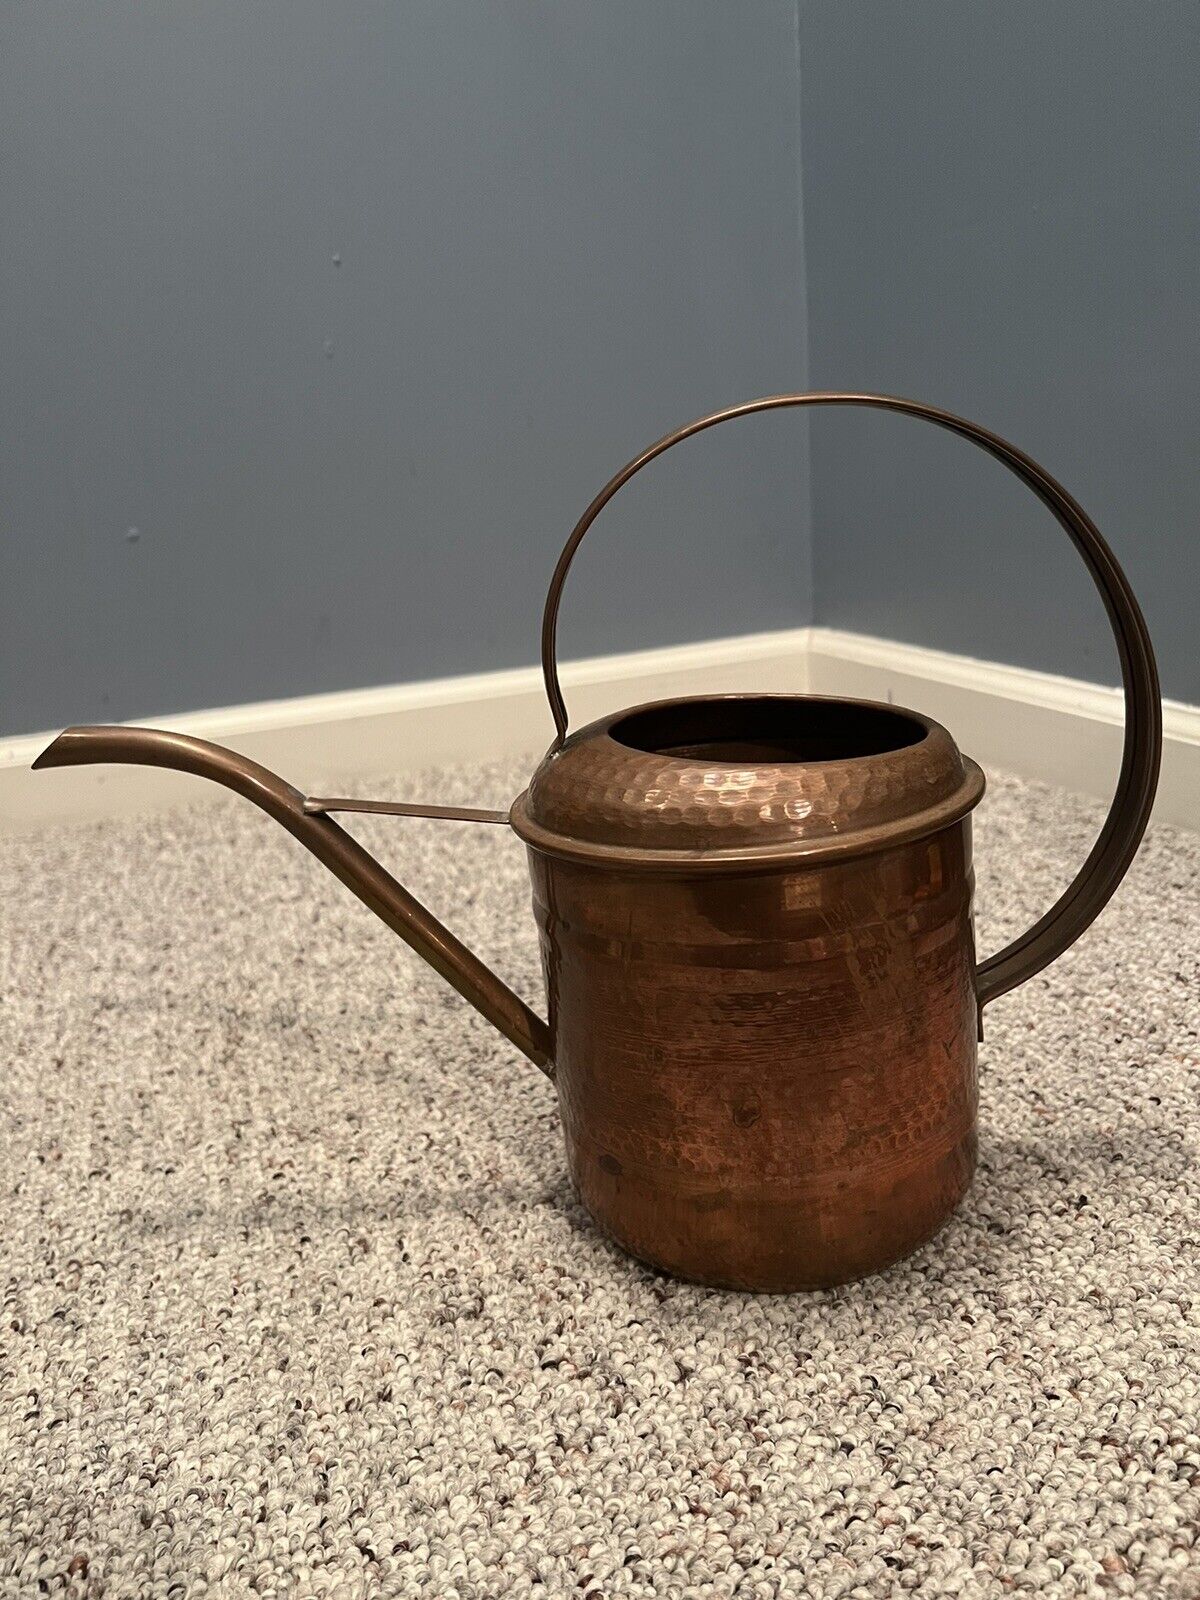 Vintage Copper Watering Can Hammered Center Made in Turkey